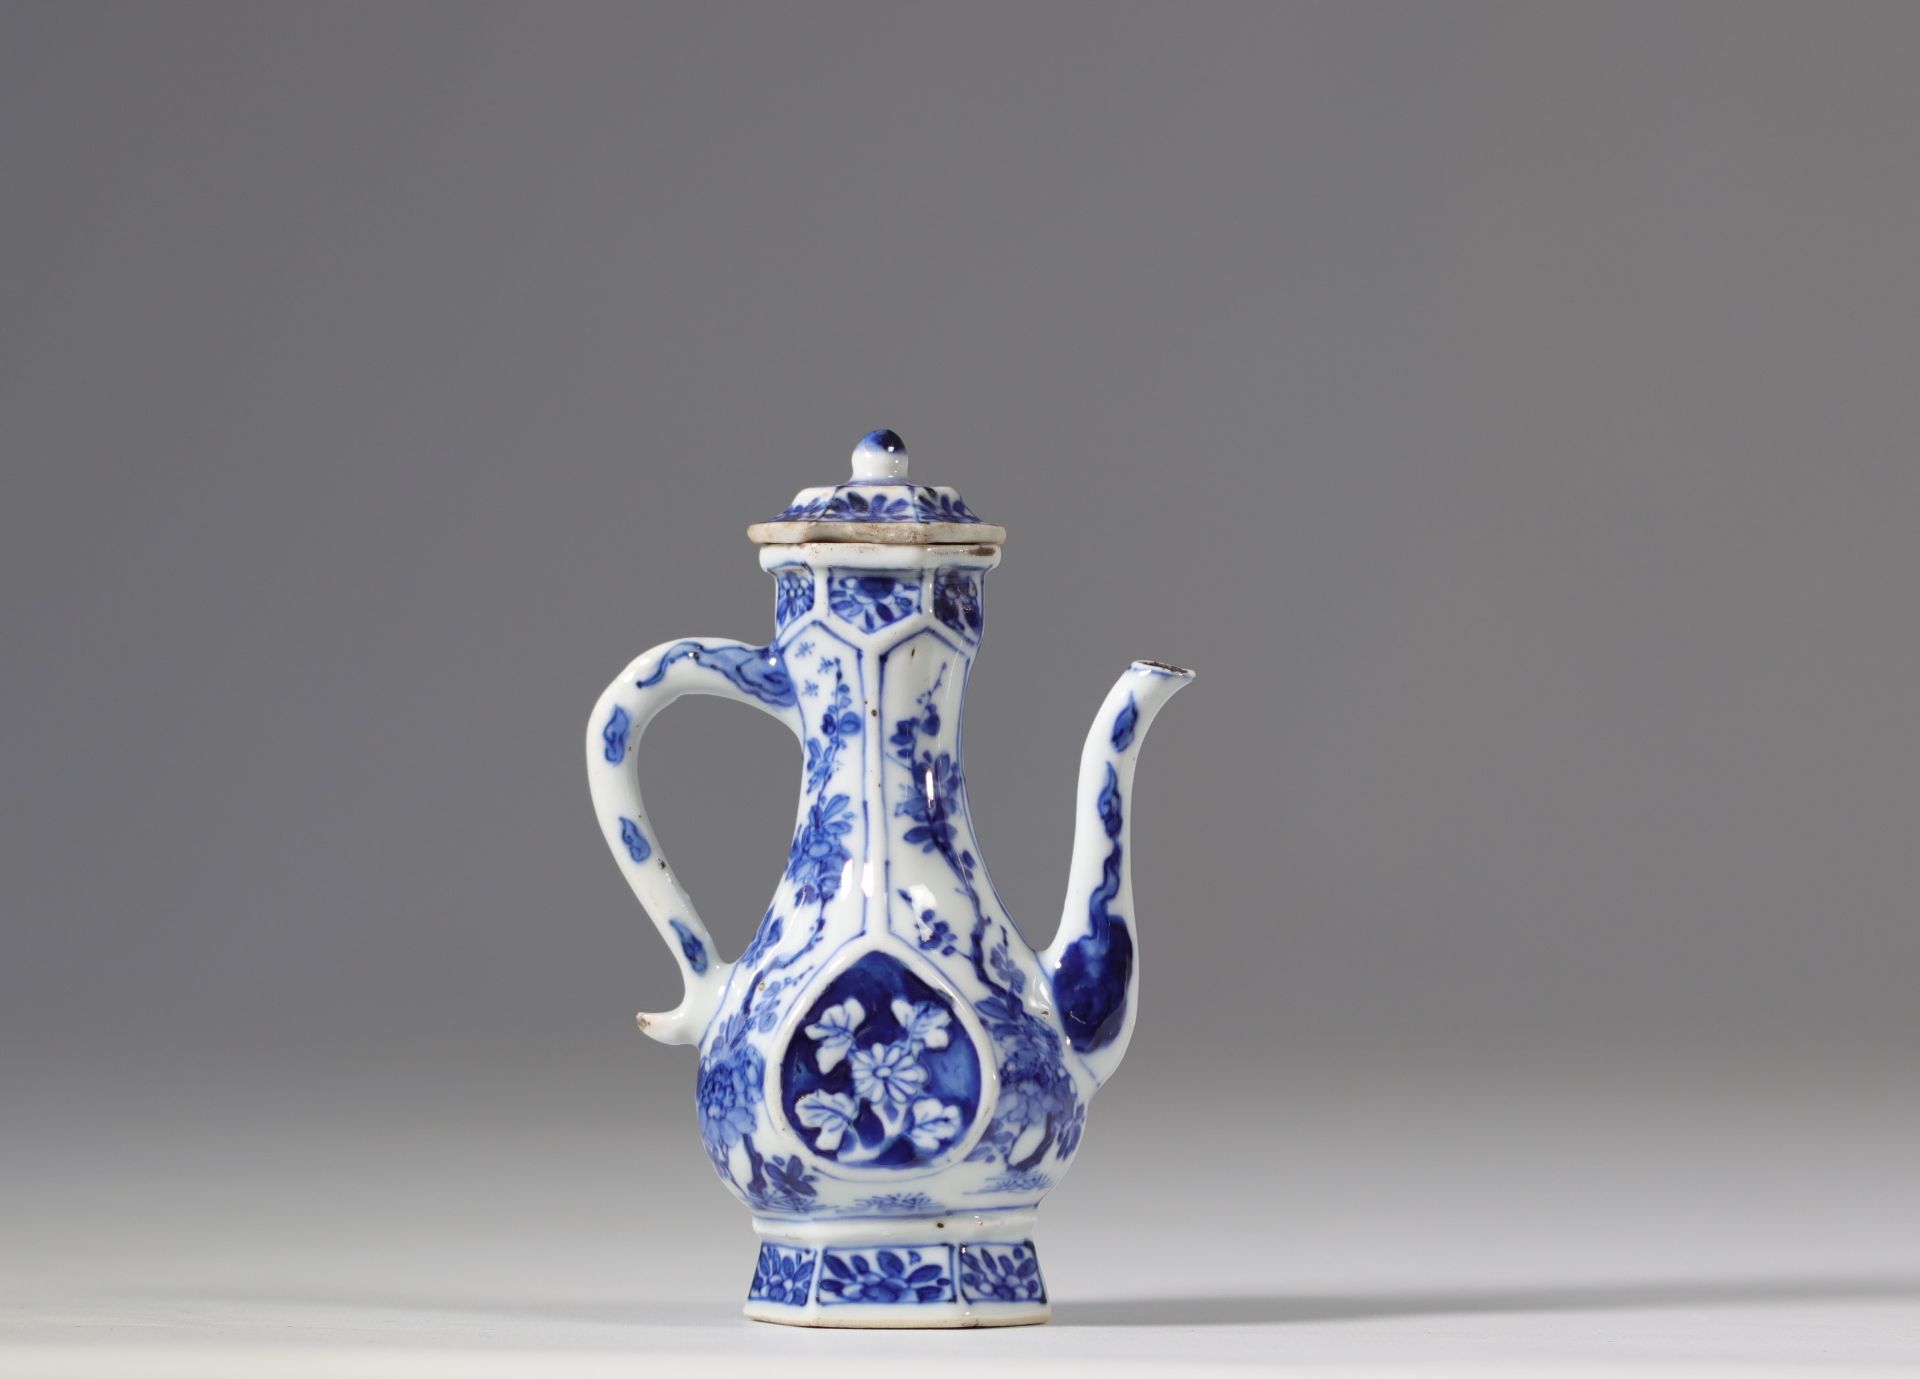 White and blue porcelain teapot with floral decoration from the 17th century Kangxi - Image 2 of 4